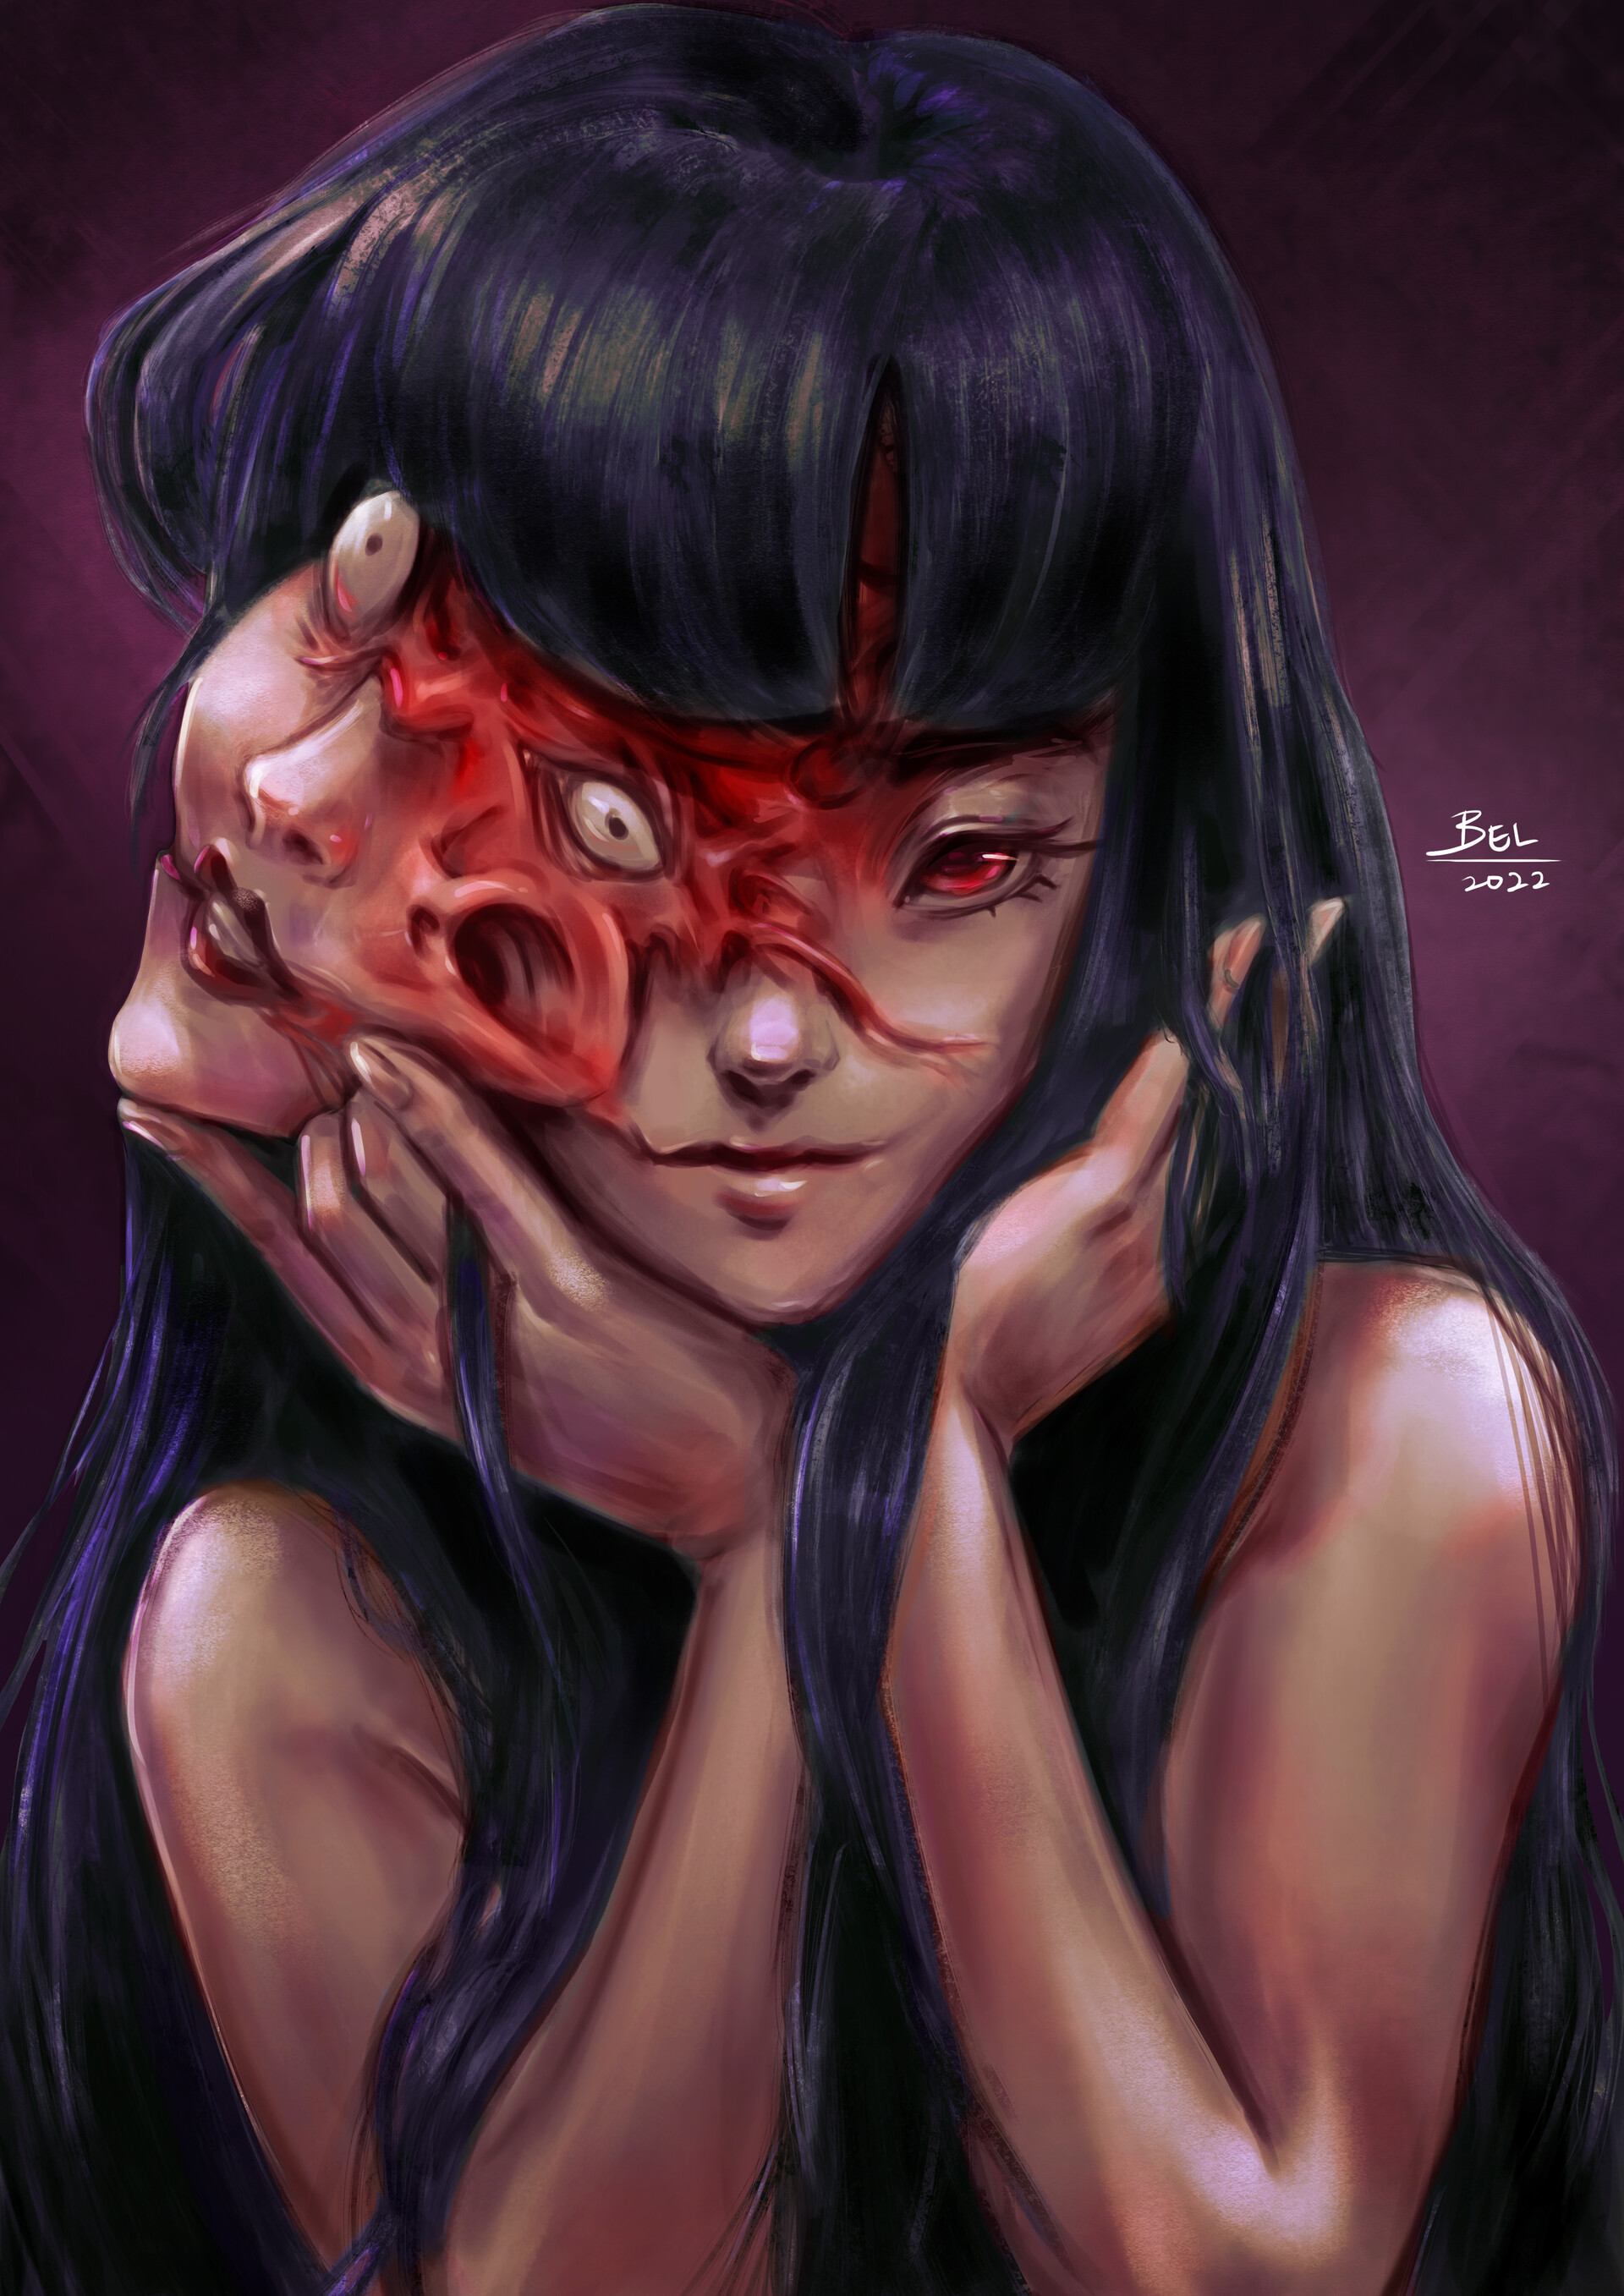 Tomie l Junji ito collection by MEIIJIN13 on DeviantArt